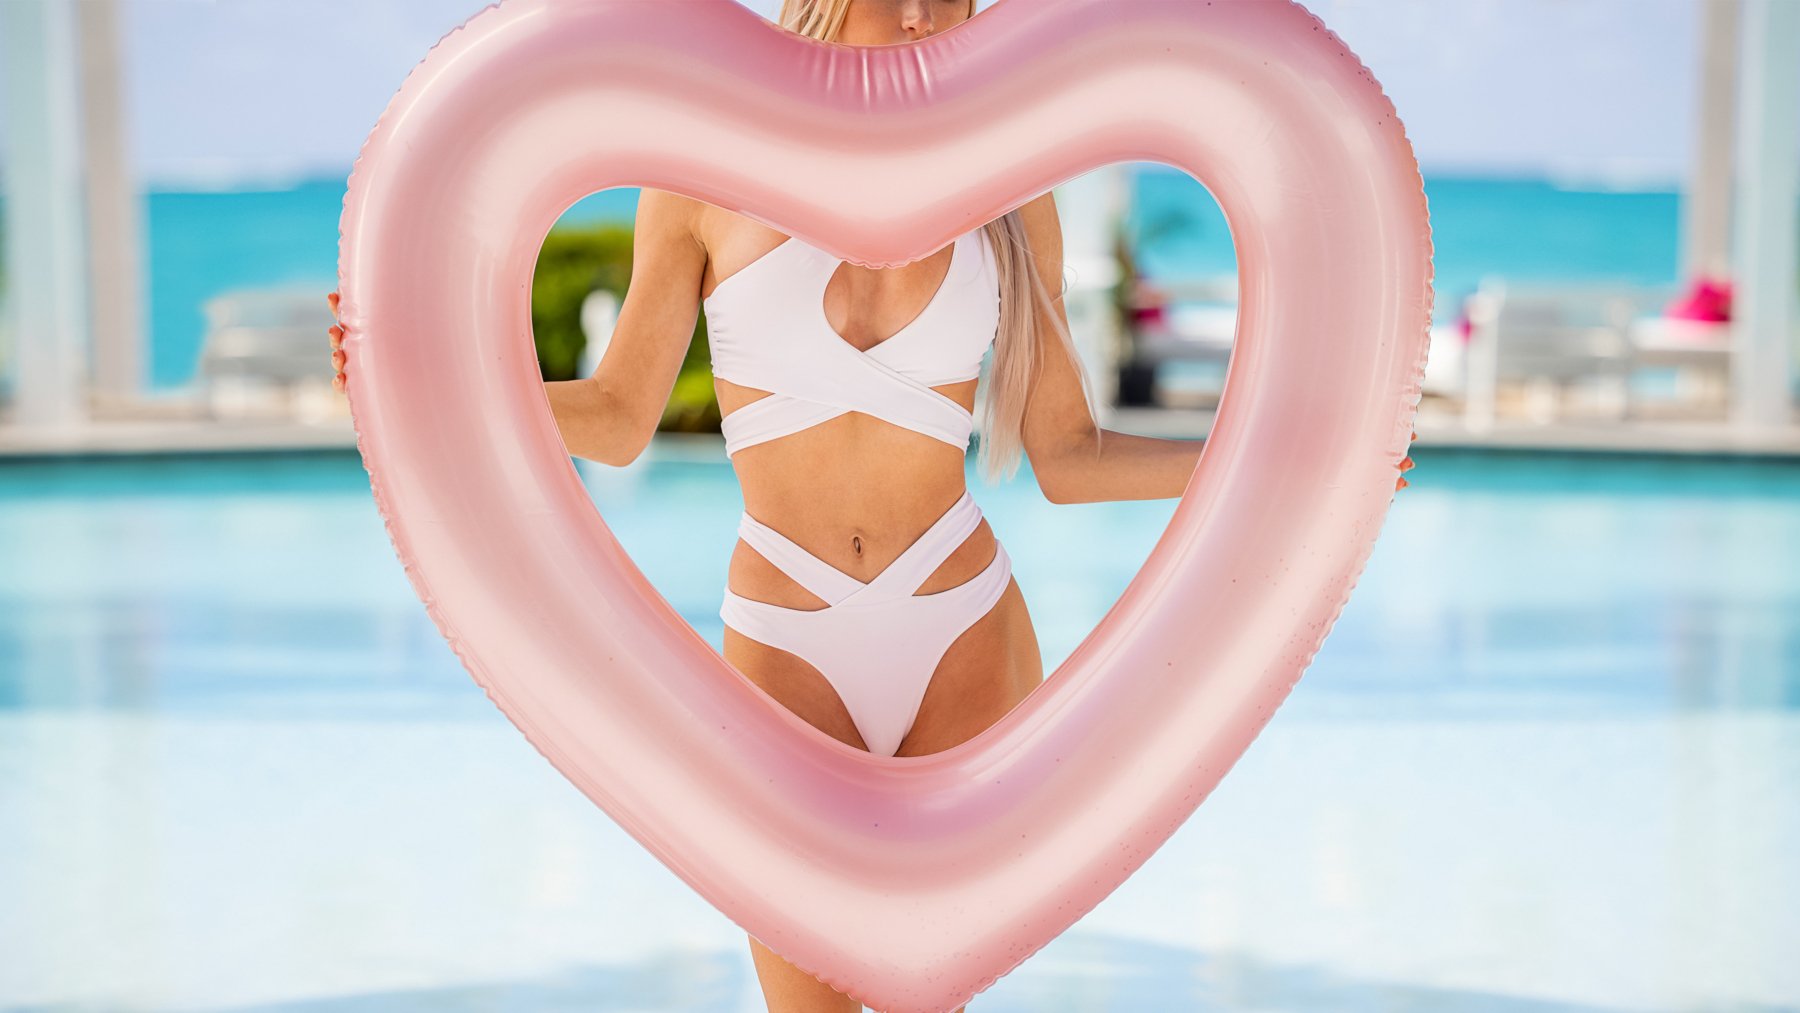 Promotional photo for 'Too Hot to Handle' Season 4. It features a woman in a white bikini, and she's holding a pink heart-shaped balloon, which is covering her face.